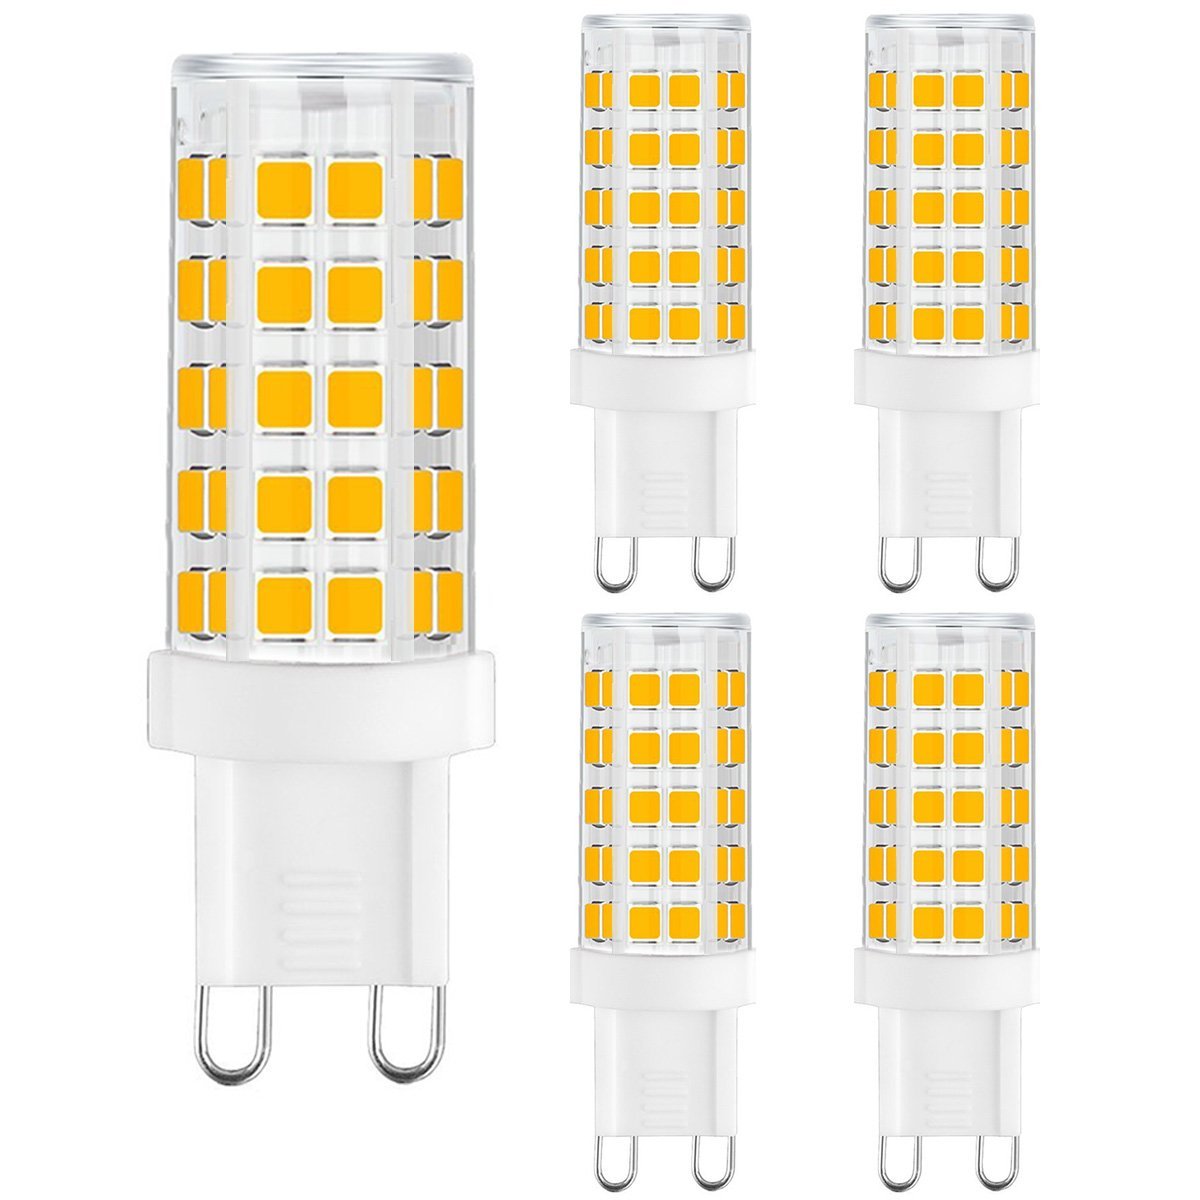 Warm White 5W Replace 40W Halogen Bulb for WOWLED G9 Dimmable LED Light Bulbs 